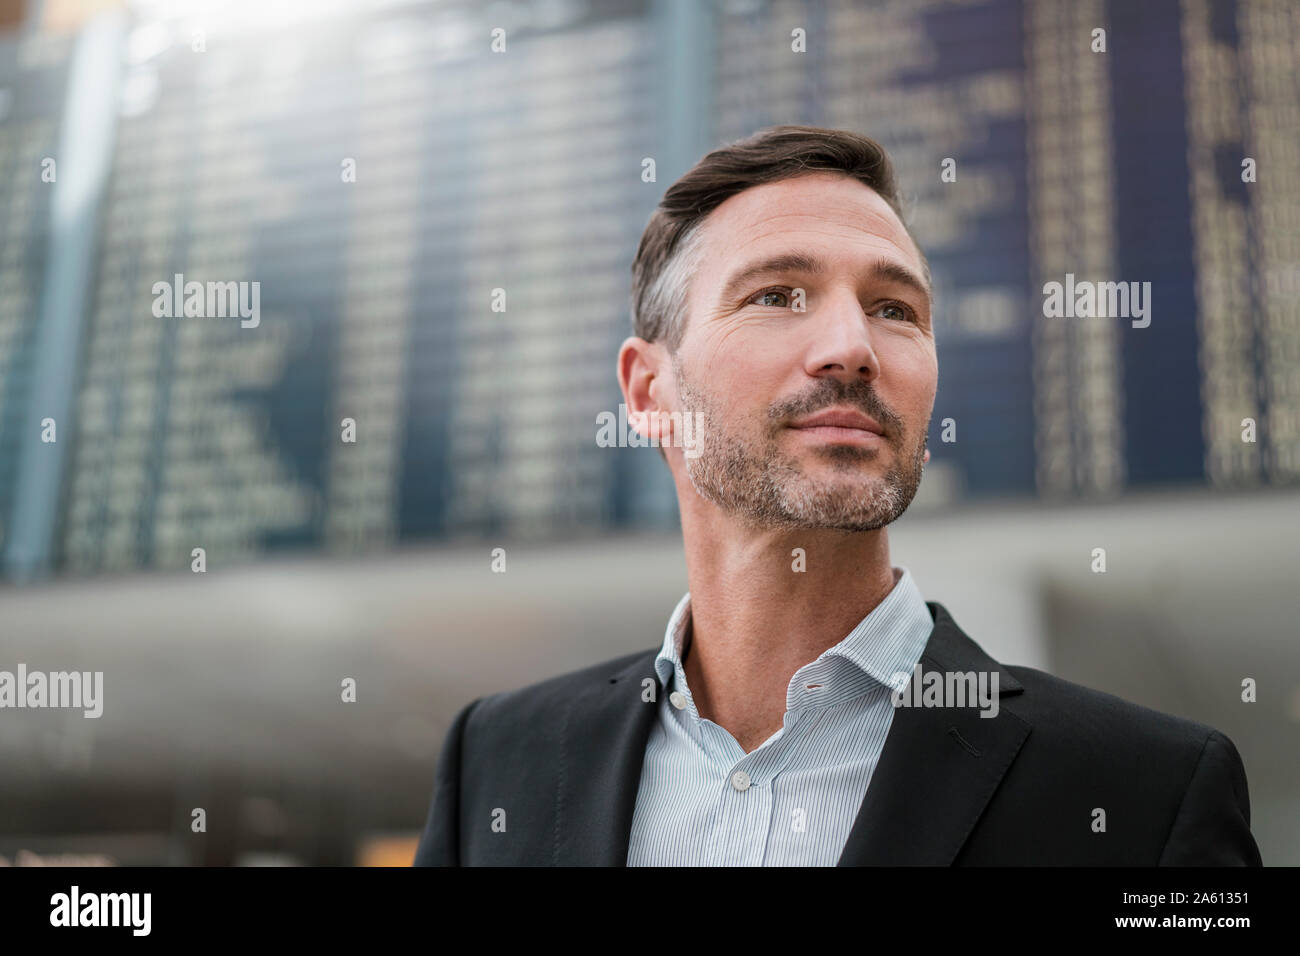 Portrait of businessman at arrival departure board at the airport Stock Photo